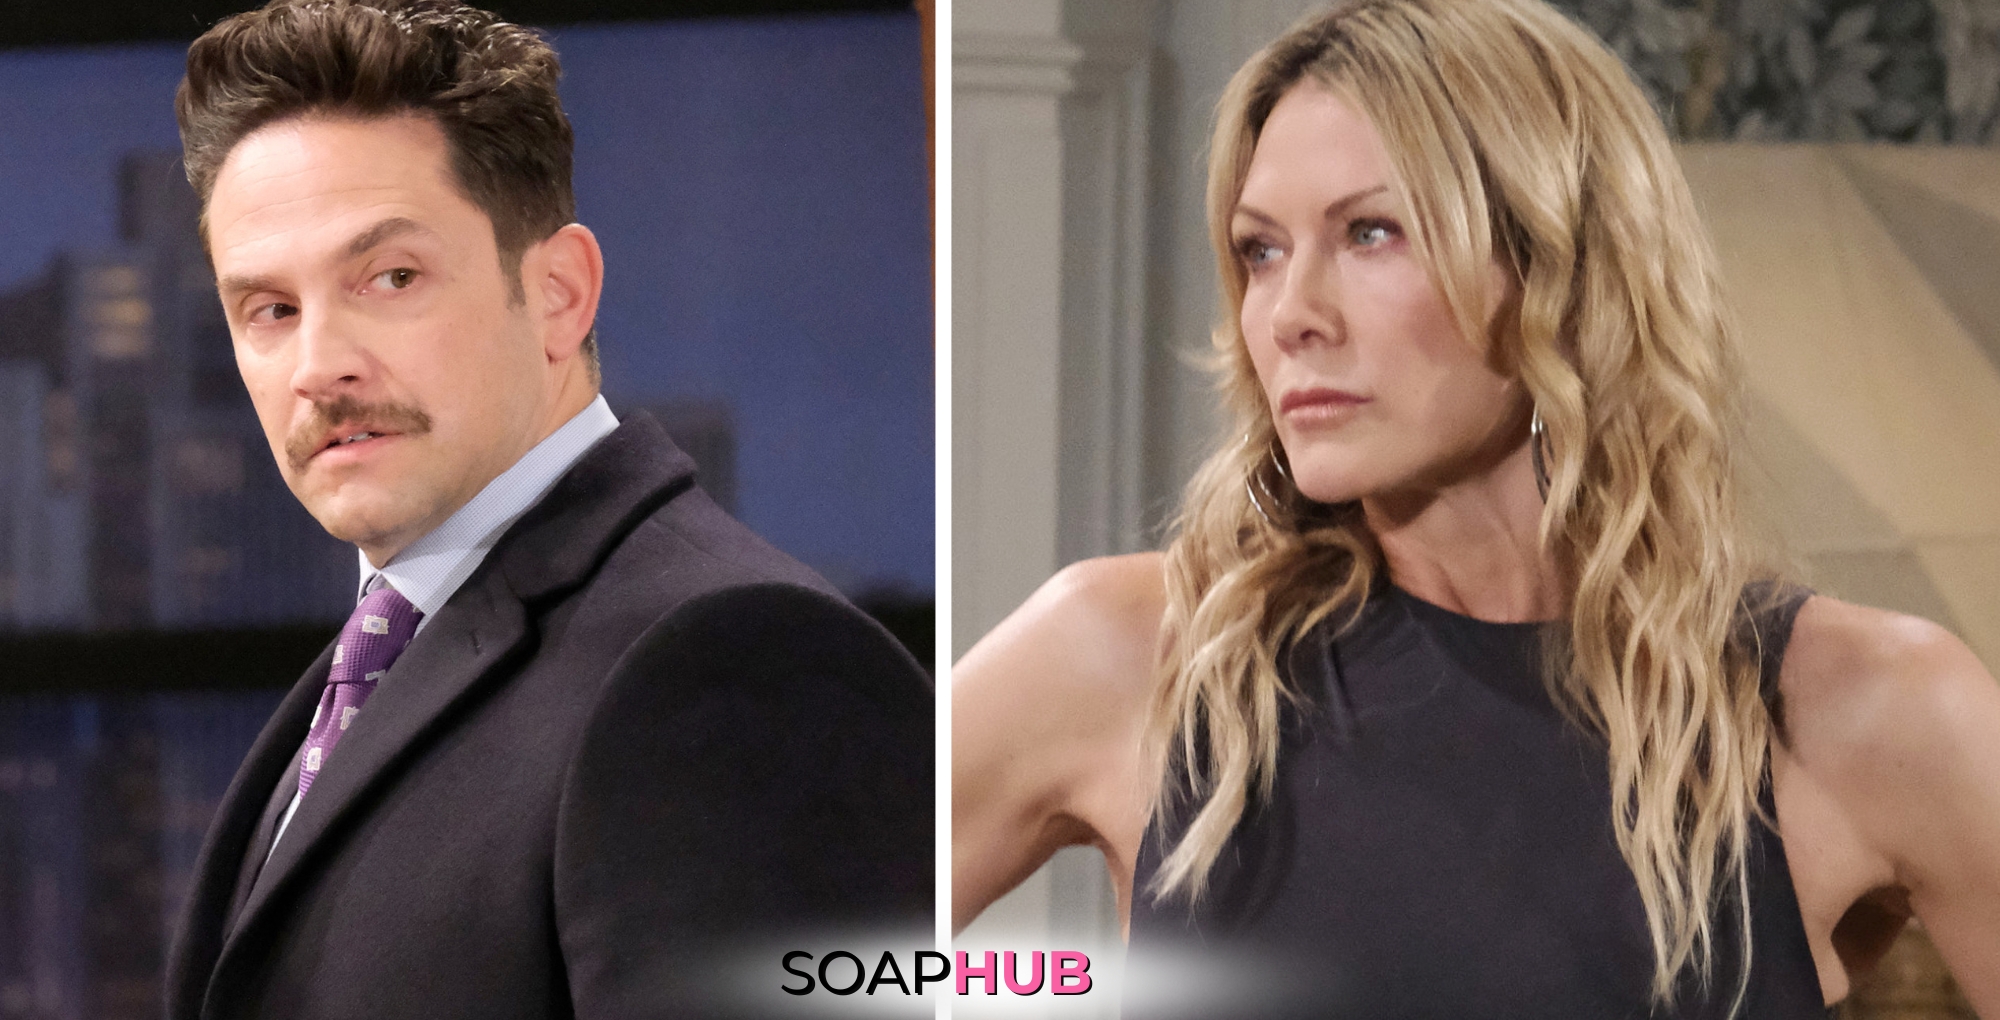 Days of our Lives spoilers for April 18 feature Stefan and Kristen with the Soap Hub logo across the bottom.